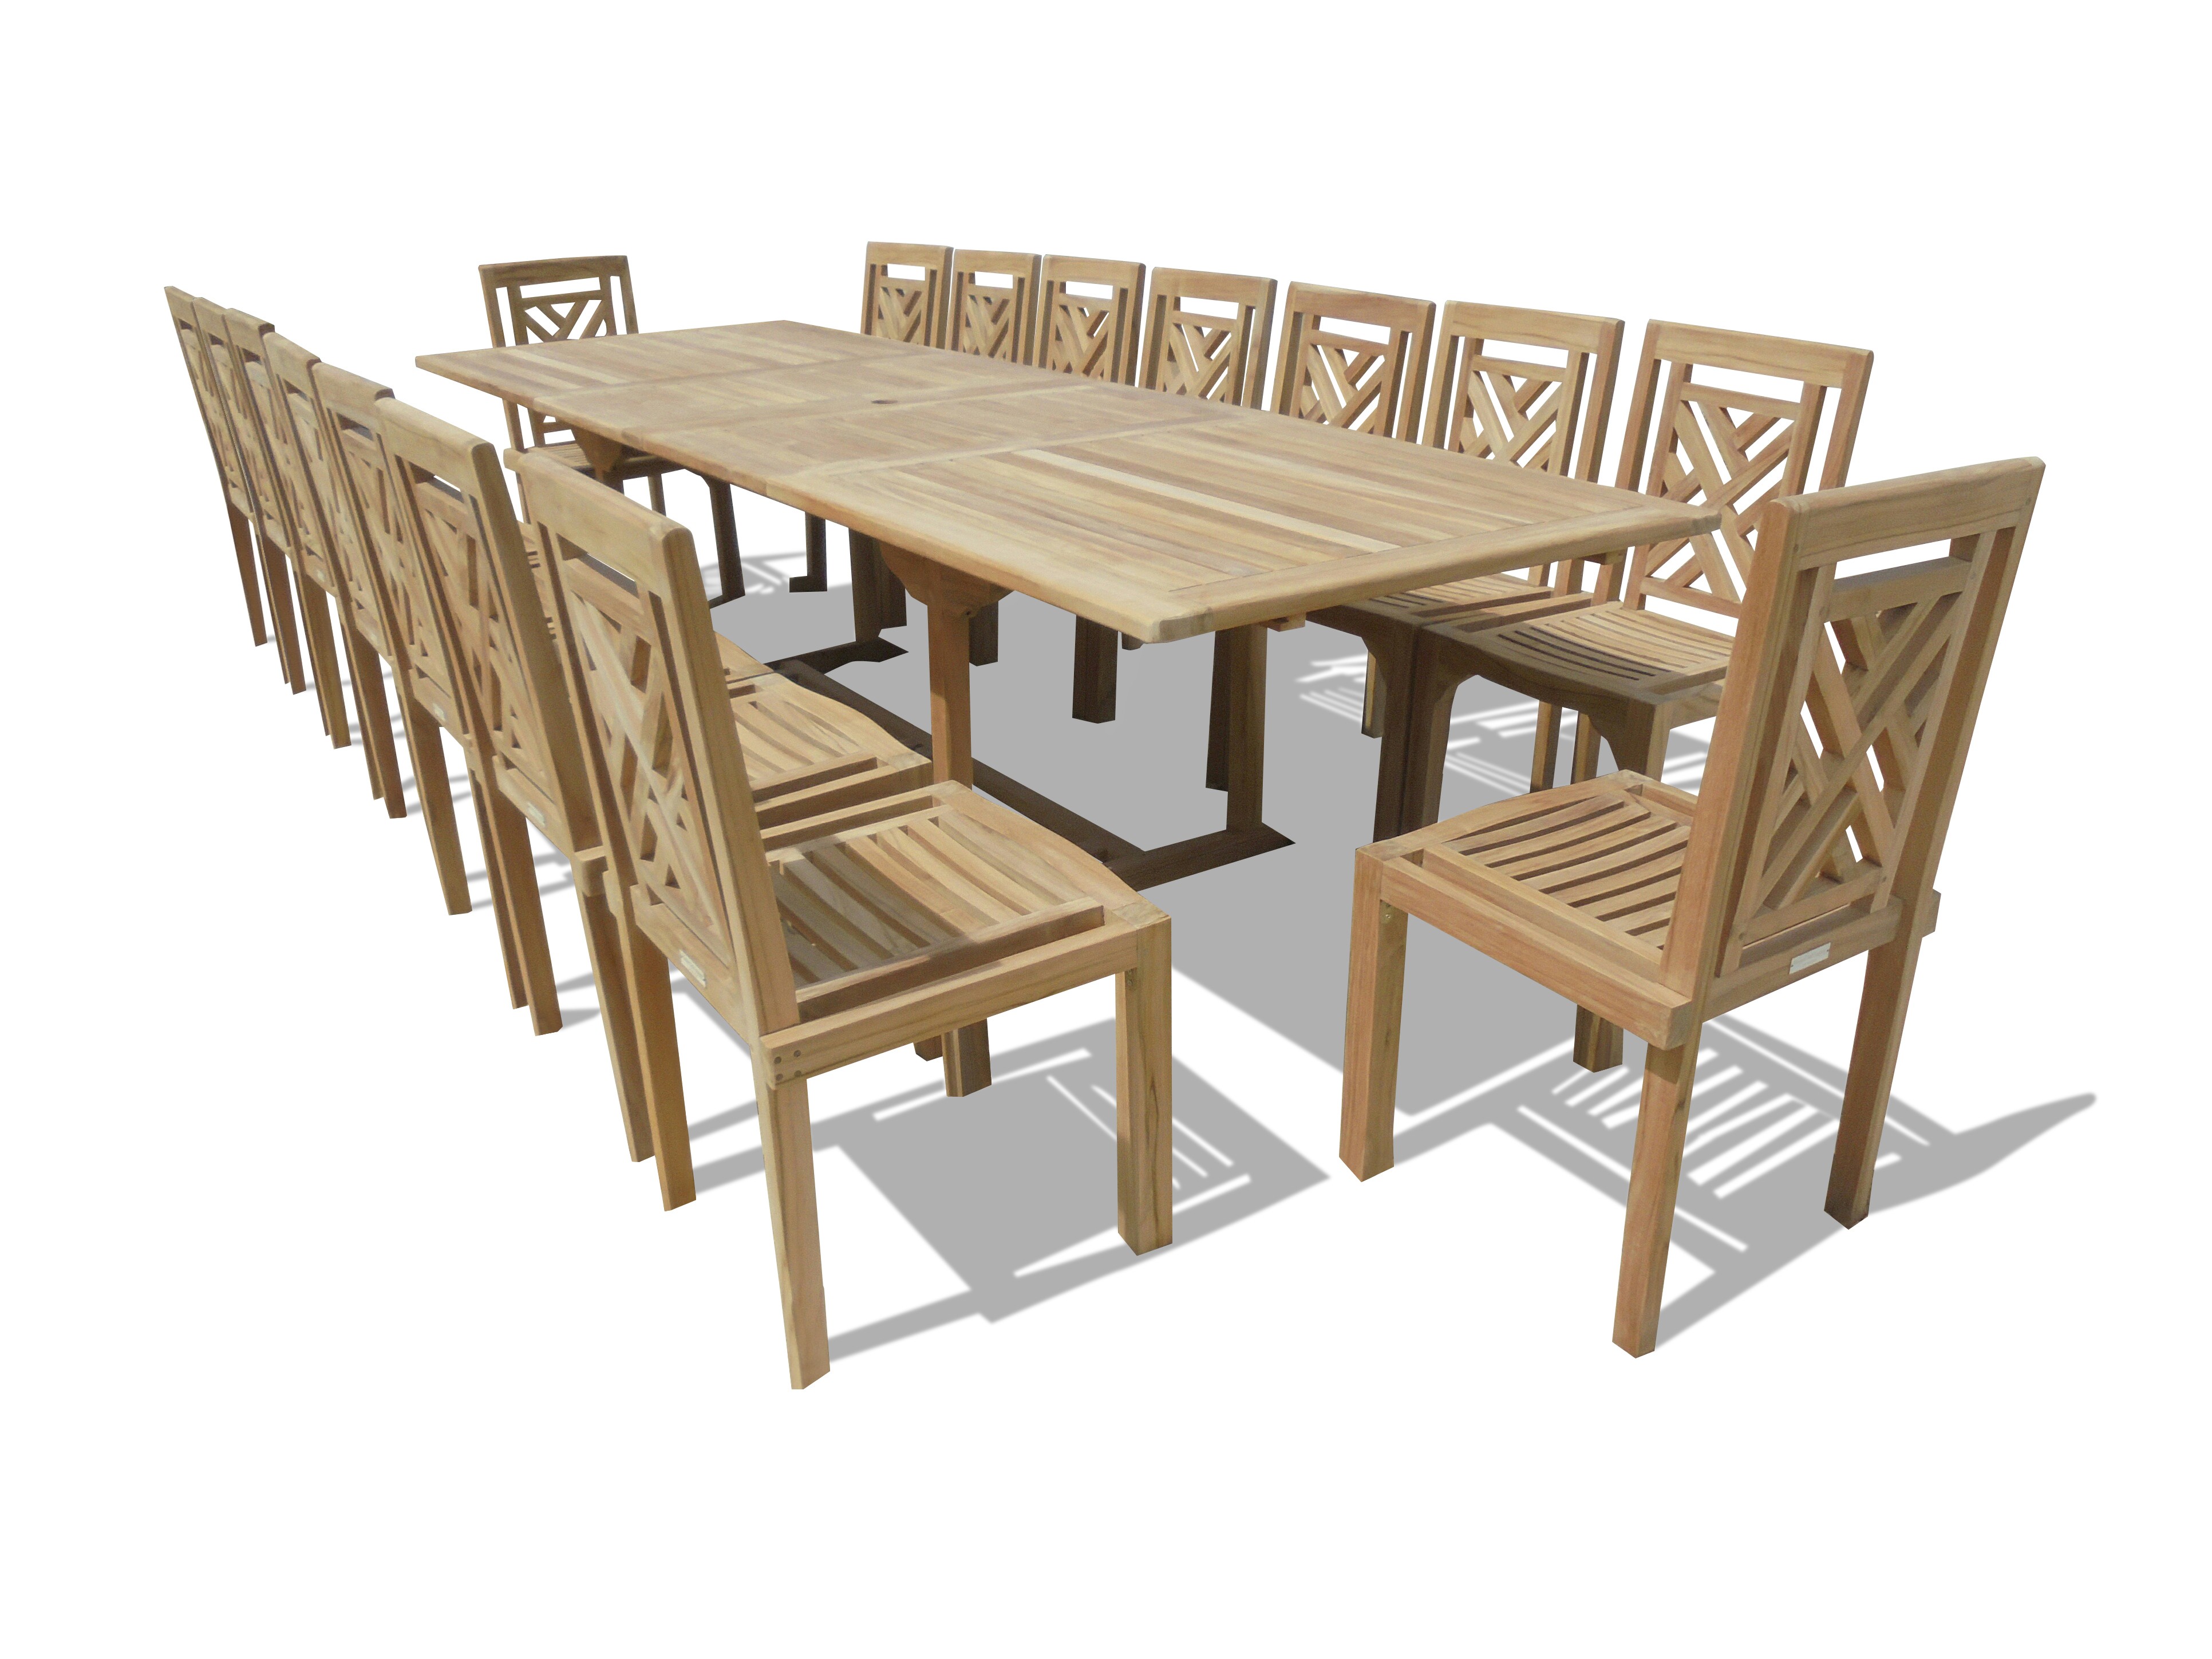 Buckingham 138" x 39" Double Leaf Extension Teak Table W/16 Chippendale Stacking Chairs...seats 16